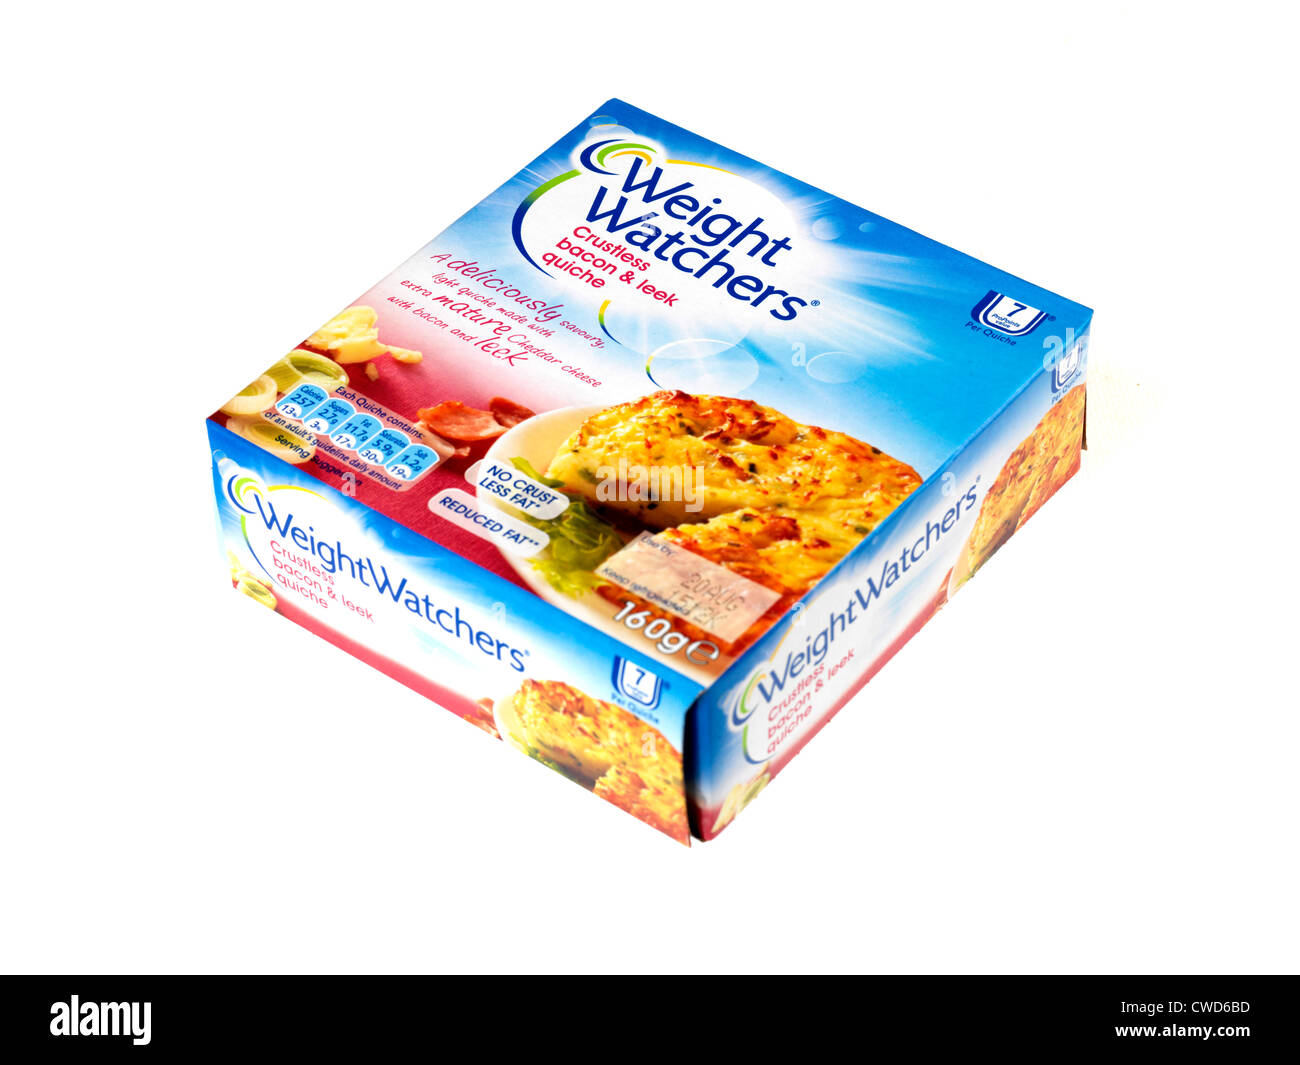 Box Of Branded Weight Watchers Quiche Tarts or Tartlets Dietary Food Isolated Against A White Background With No People And A Clipping Path Stock Photo